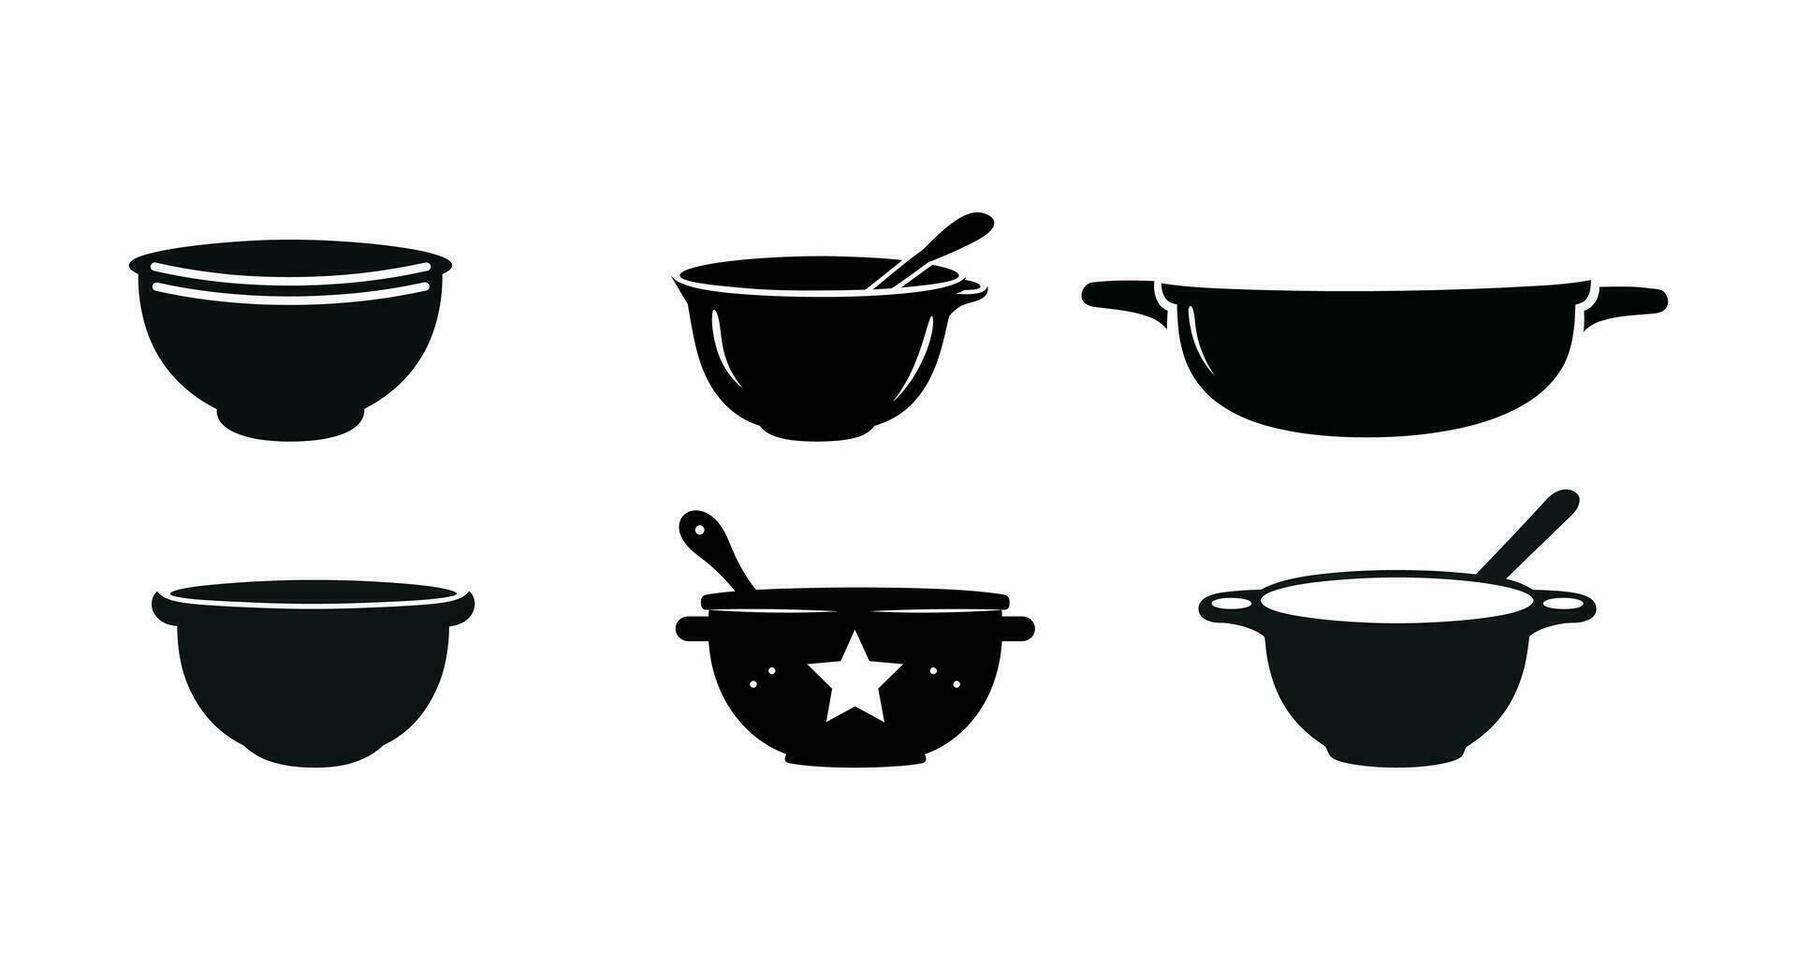 Whisking Wonders Mixing Bowl Silhouette vector